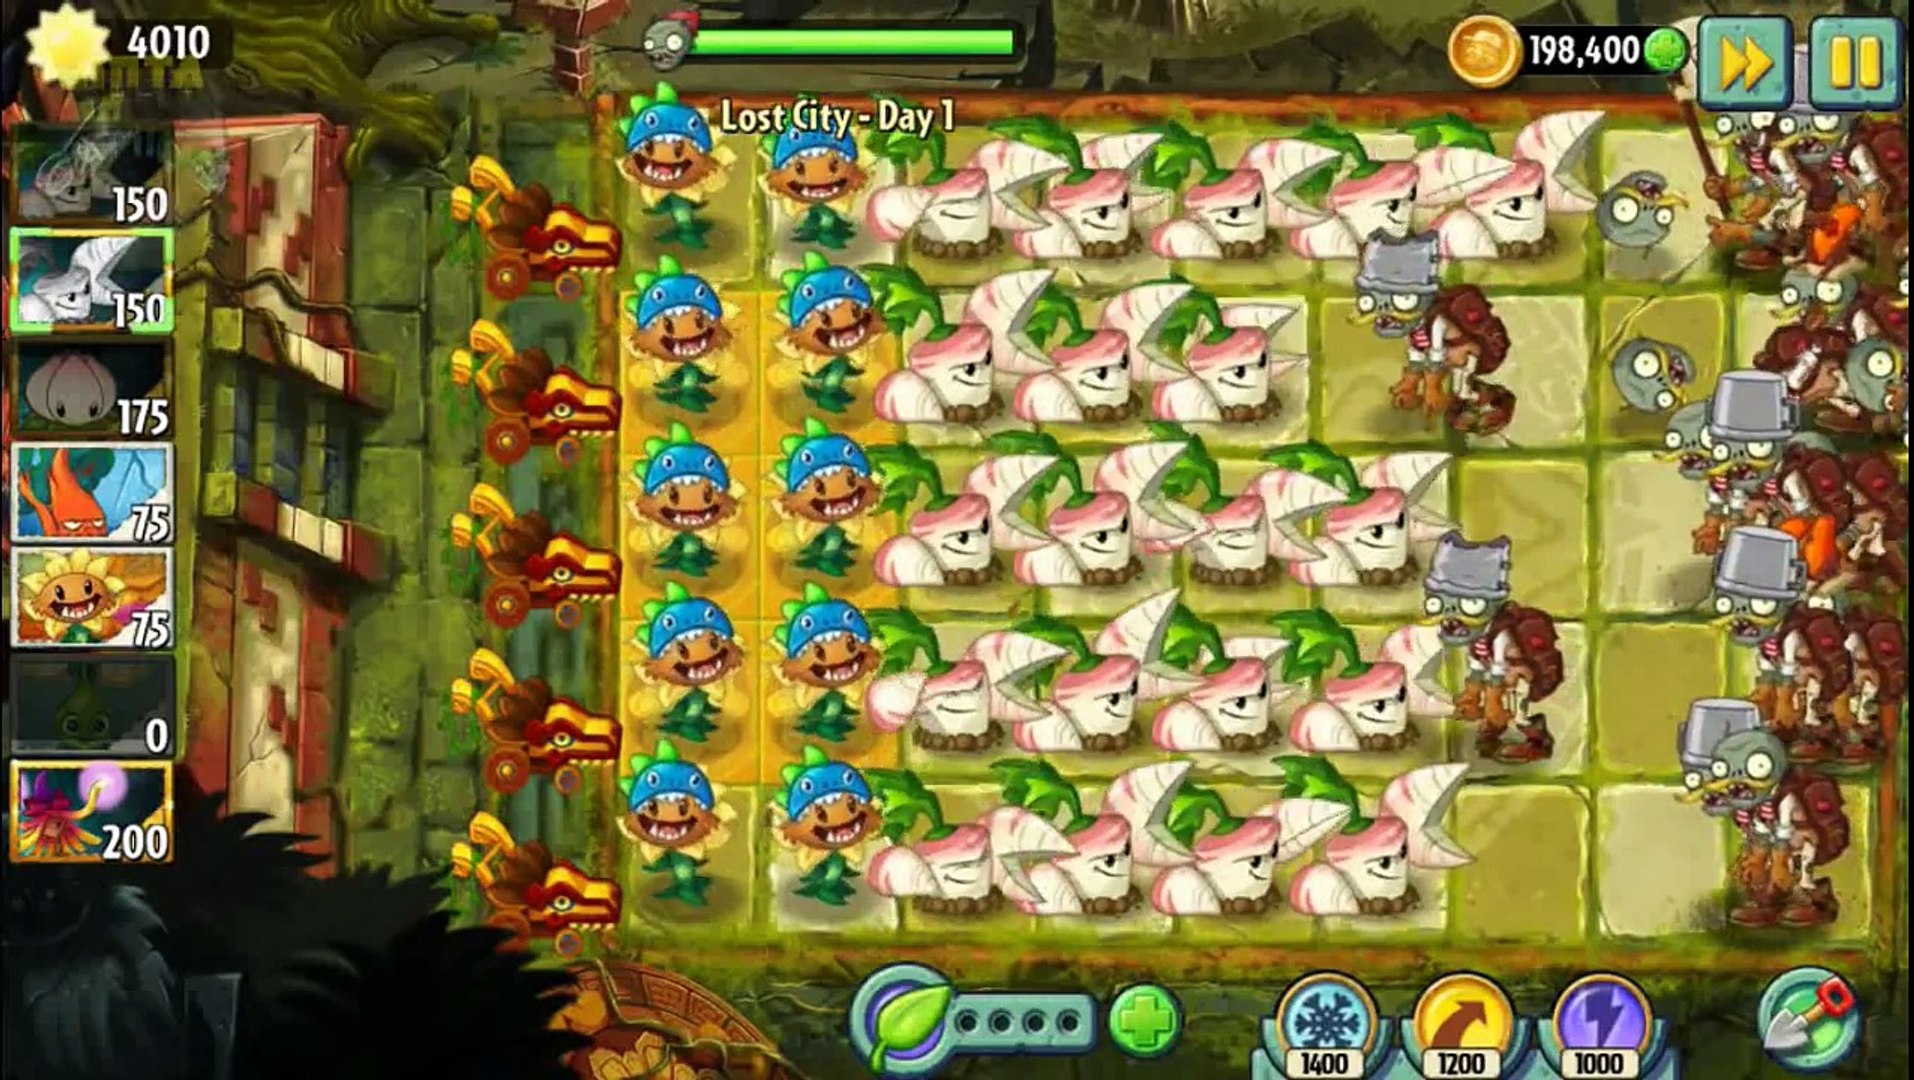 Gameplay video of Plants vs. Zombies 2